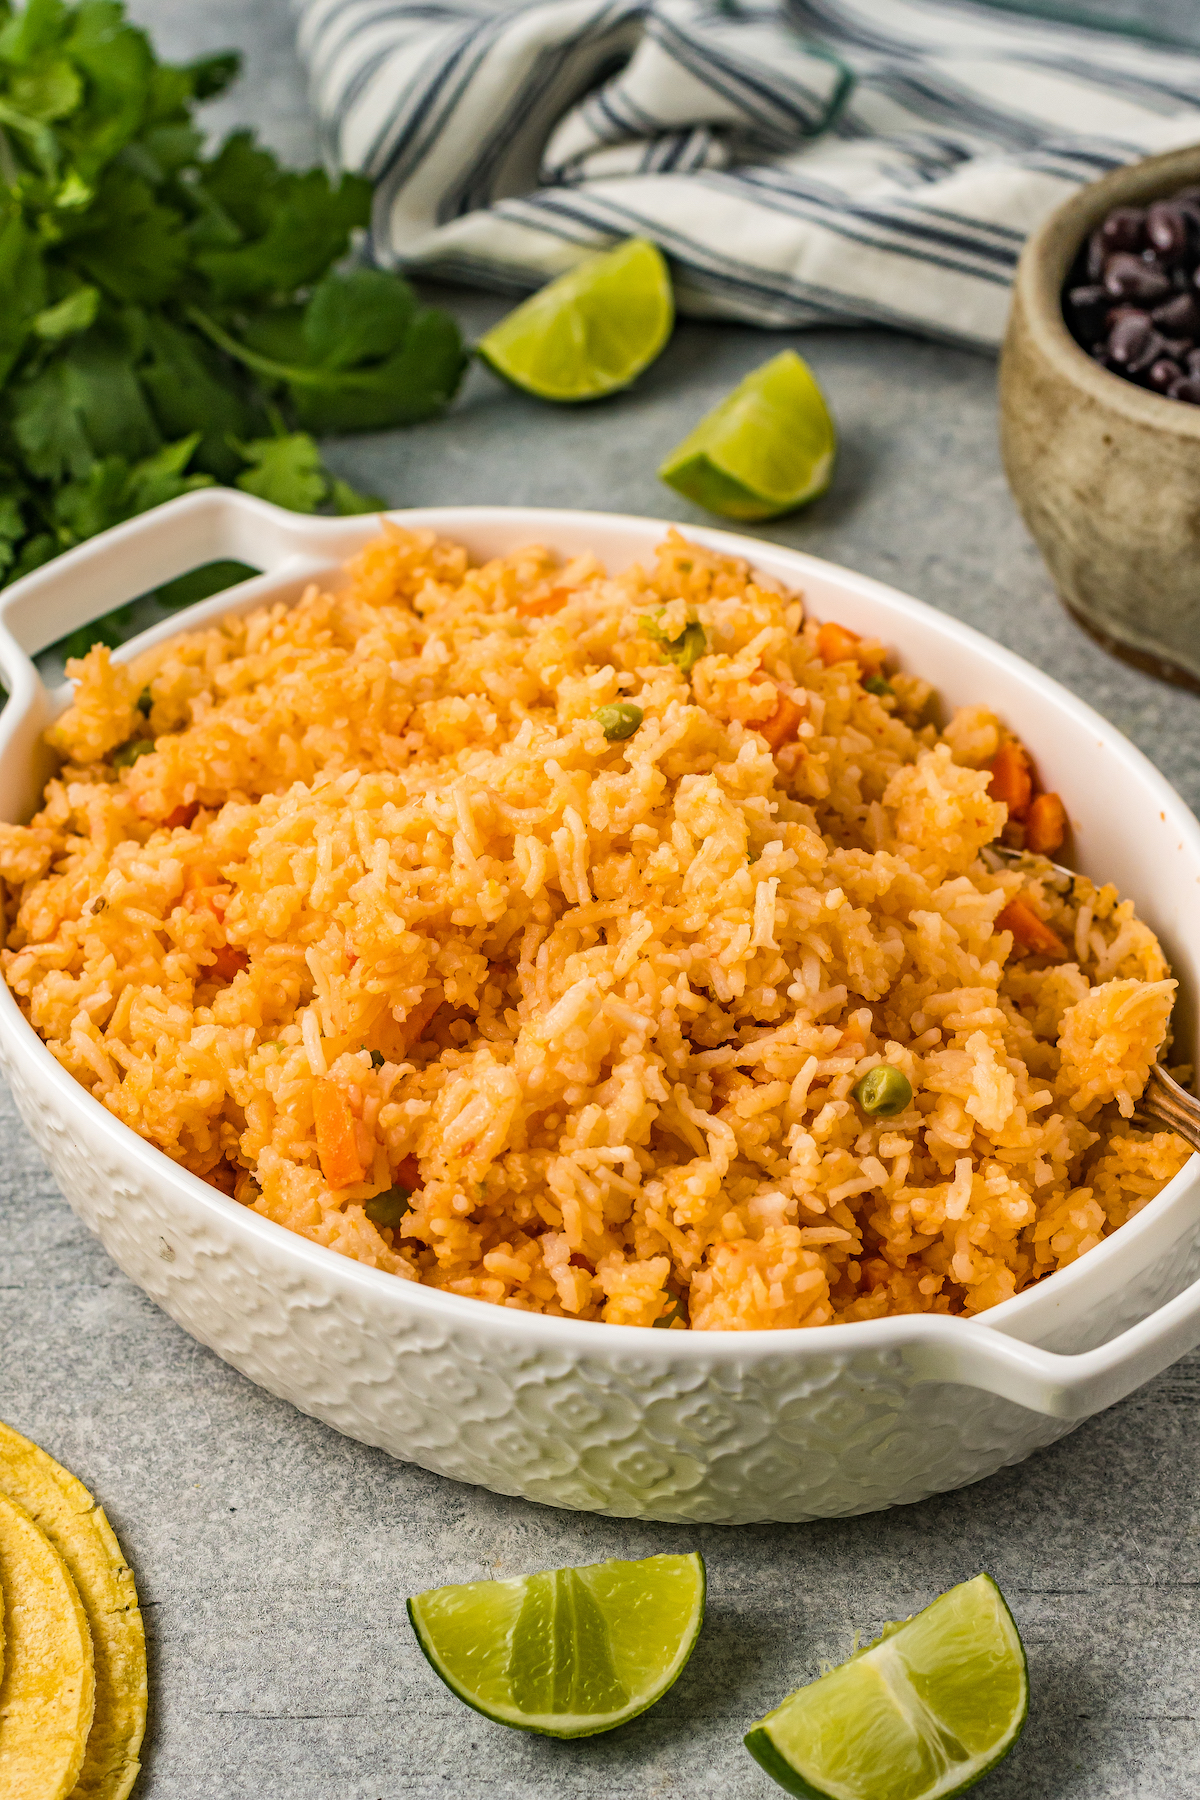 An oval casserole dish filled with fluffy, golden-orange rice.